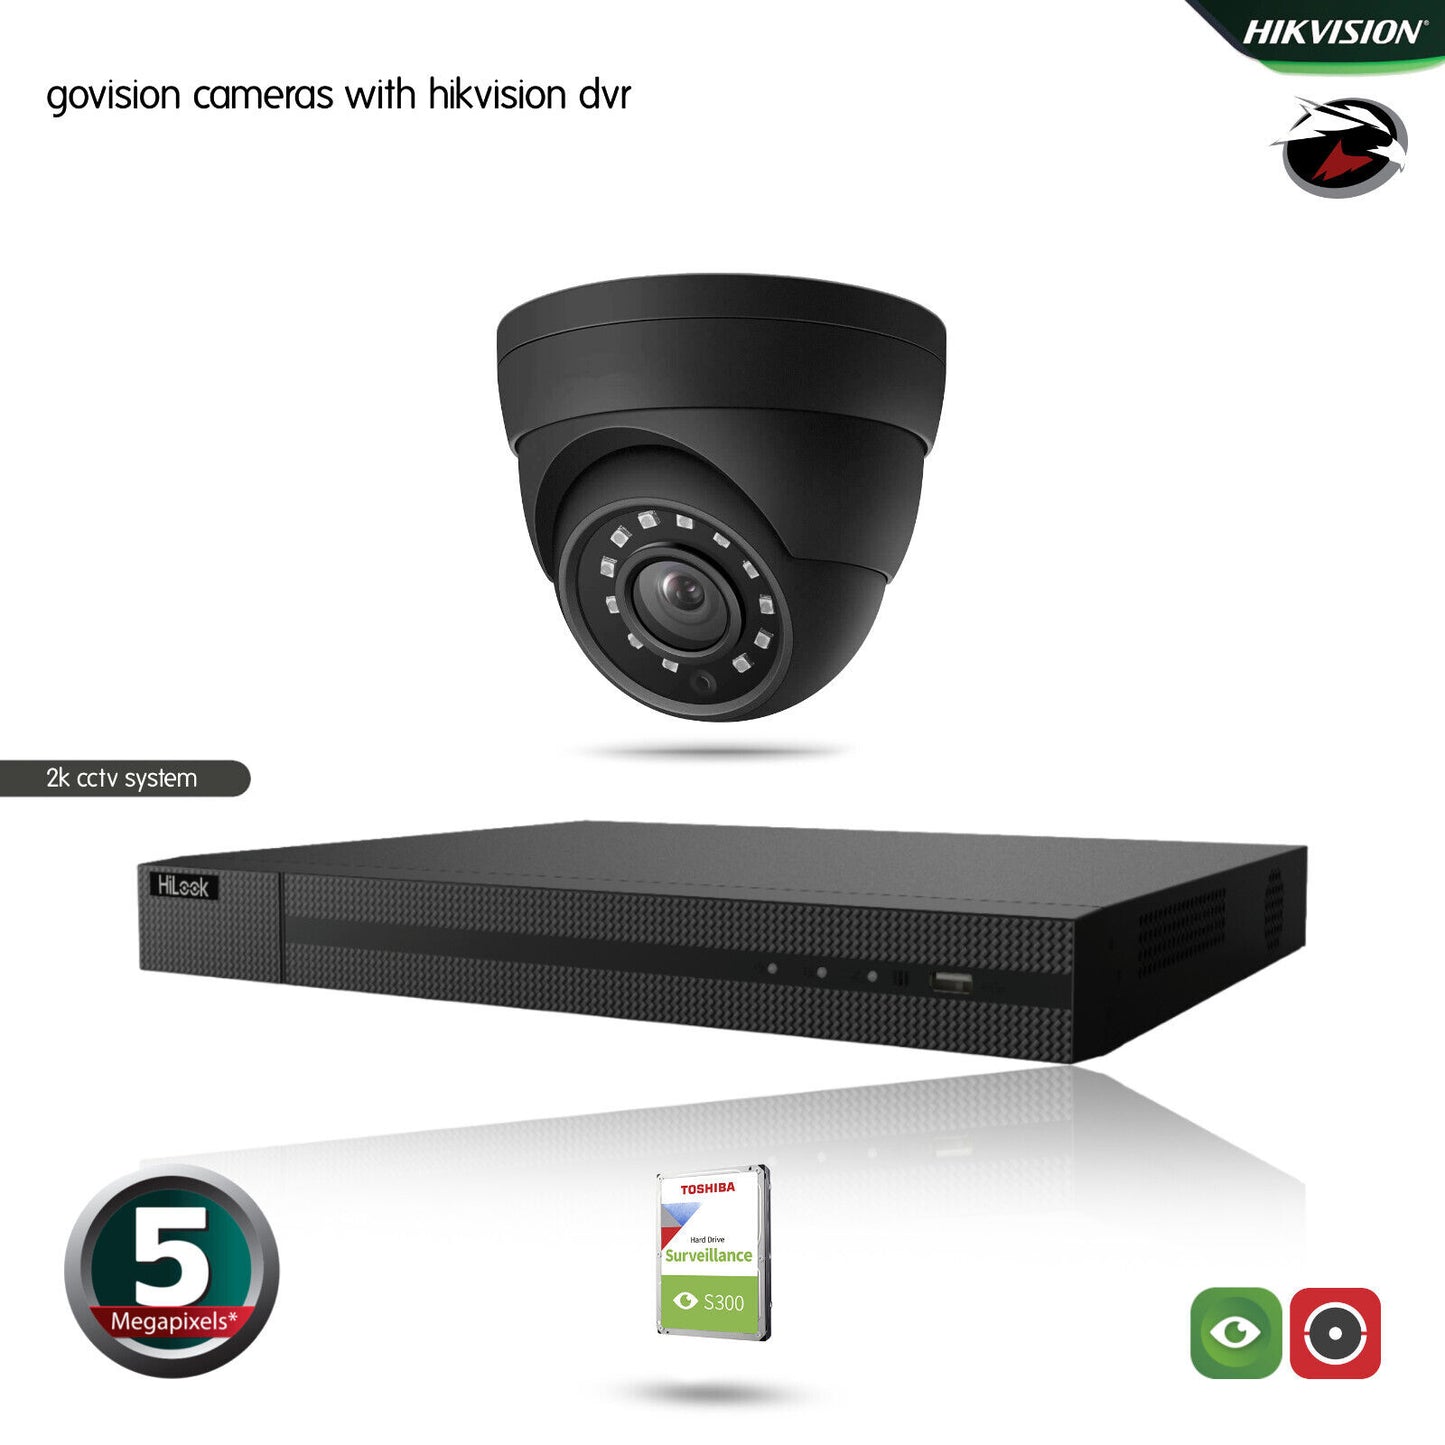 HIKVISION HILOOK CCTV SYSTEM 5MP DVR OUTDOOR NIGHTVISION SECURITY HD CAMERA KIT 4CH DVR 1xCameras 2TB HDD